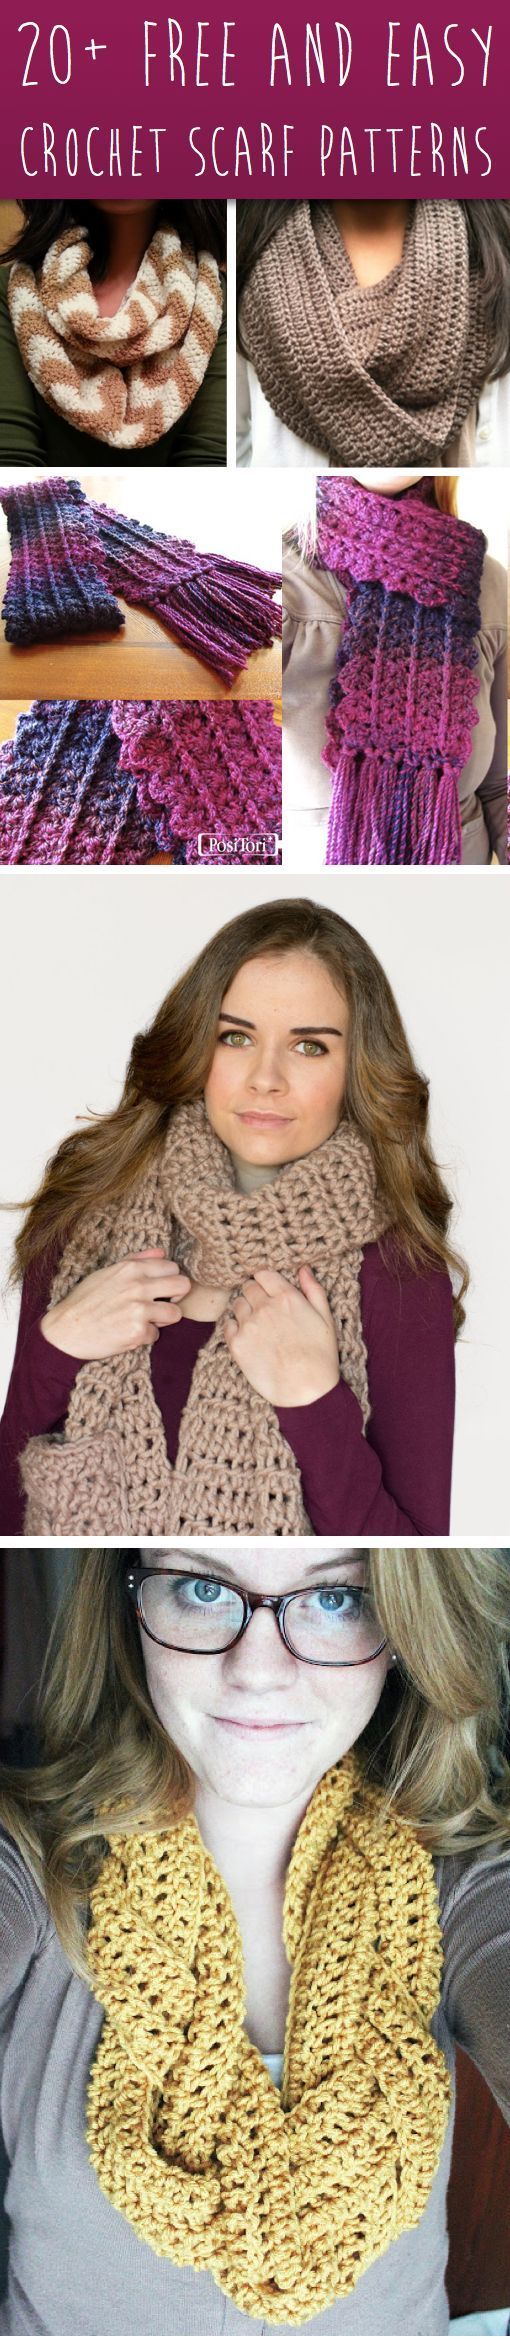 These 20+ Free and Easy Crochet Scarf Patterns Will Blow Your Mind